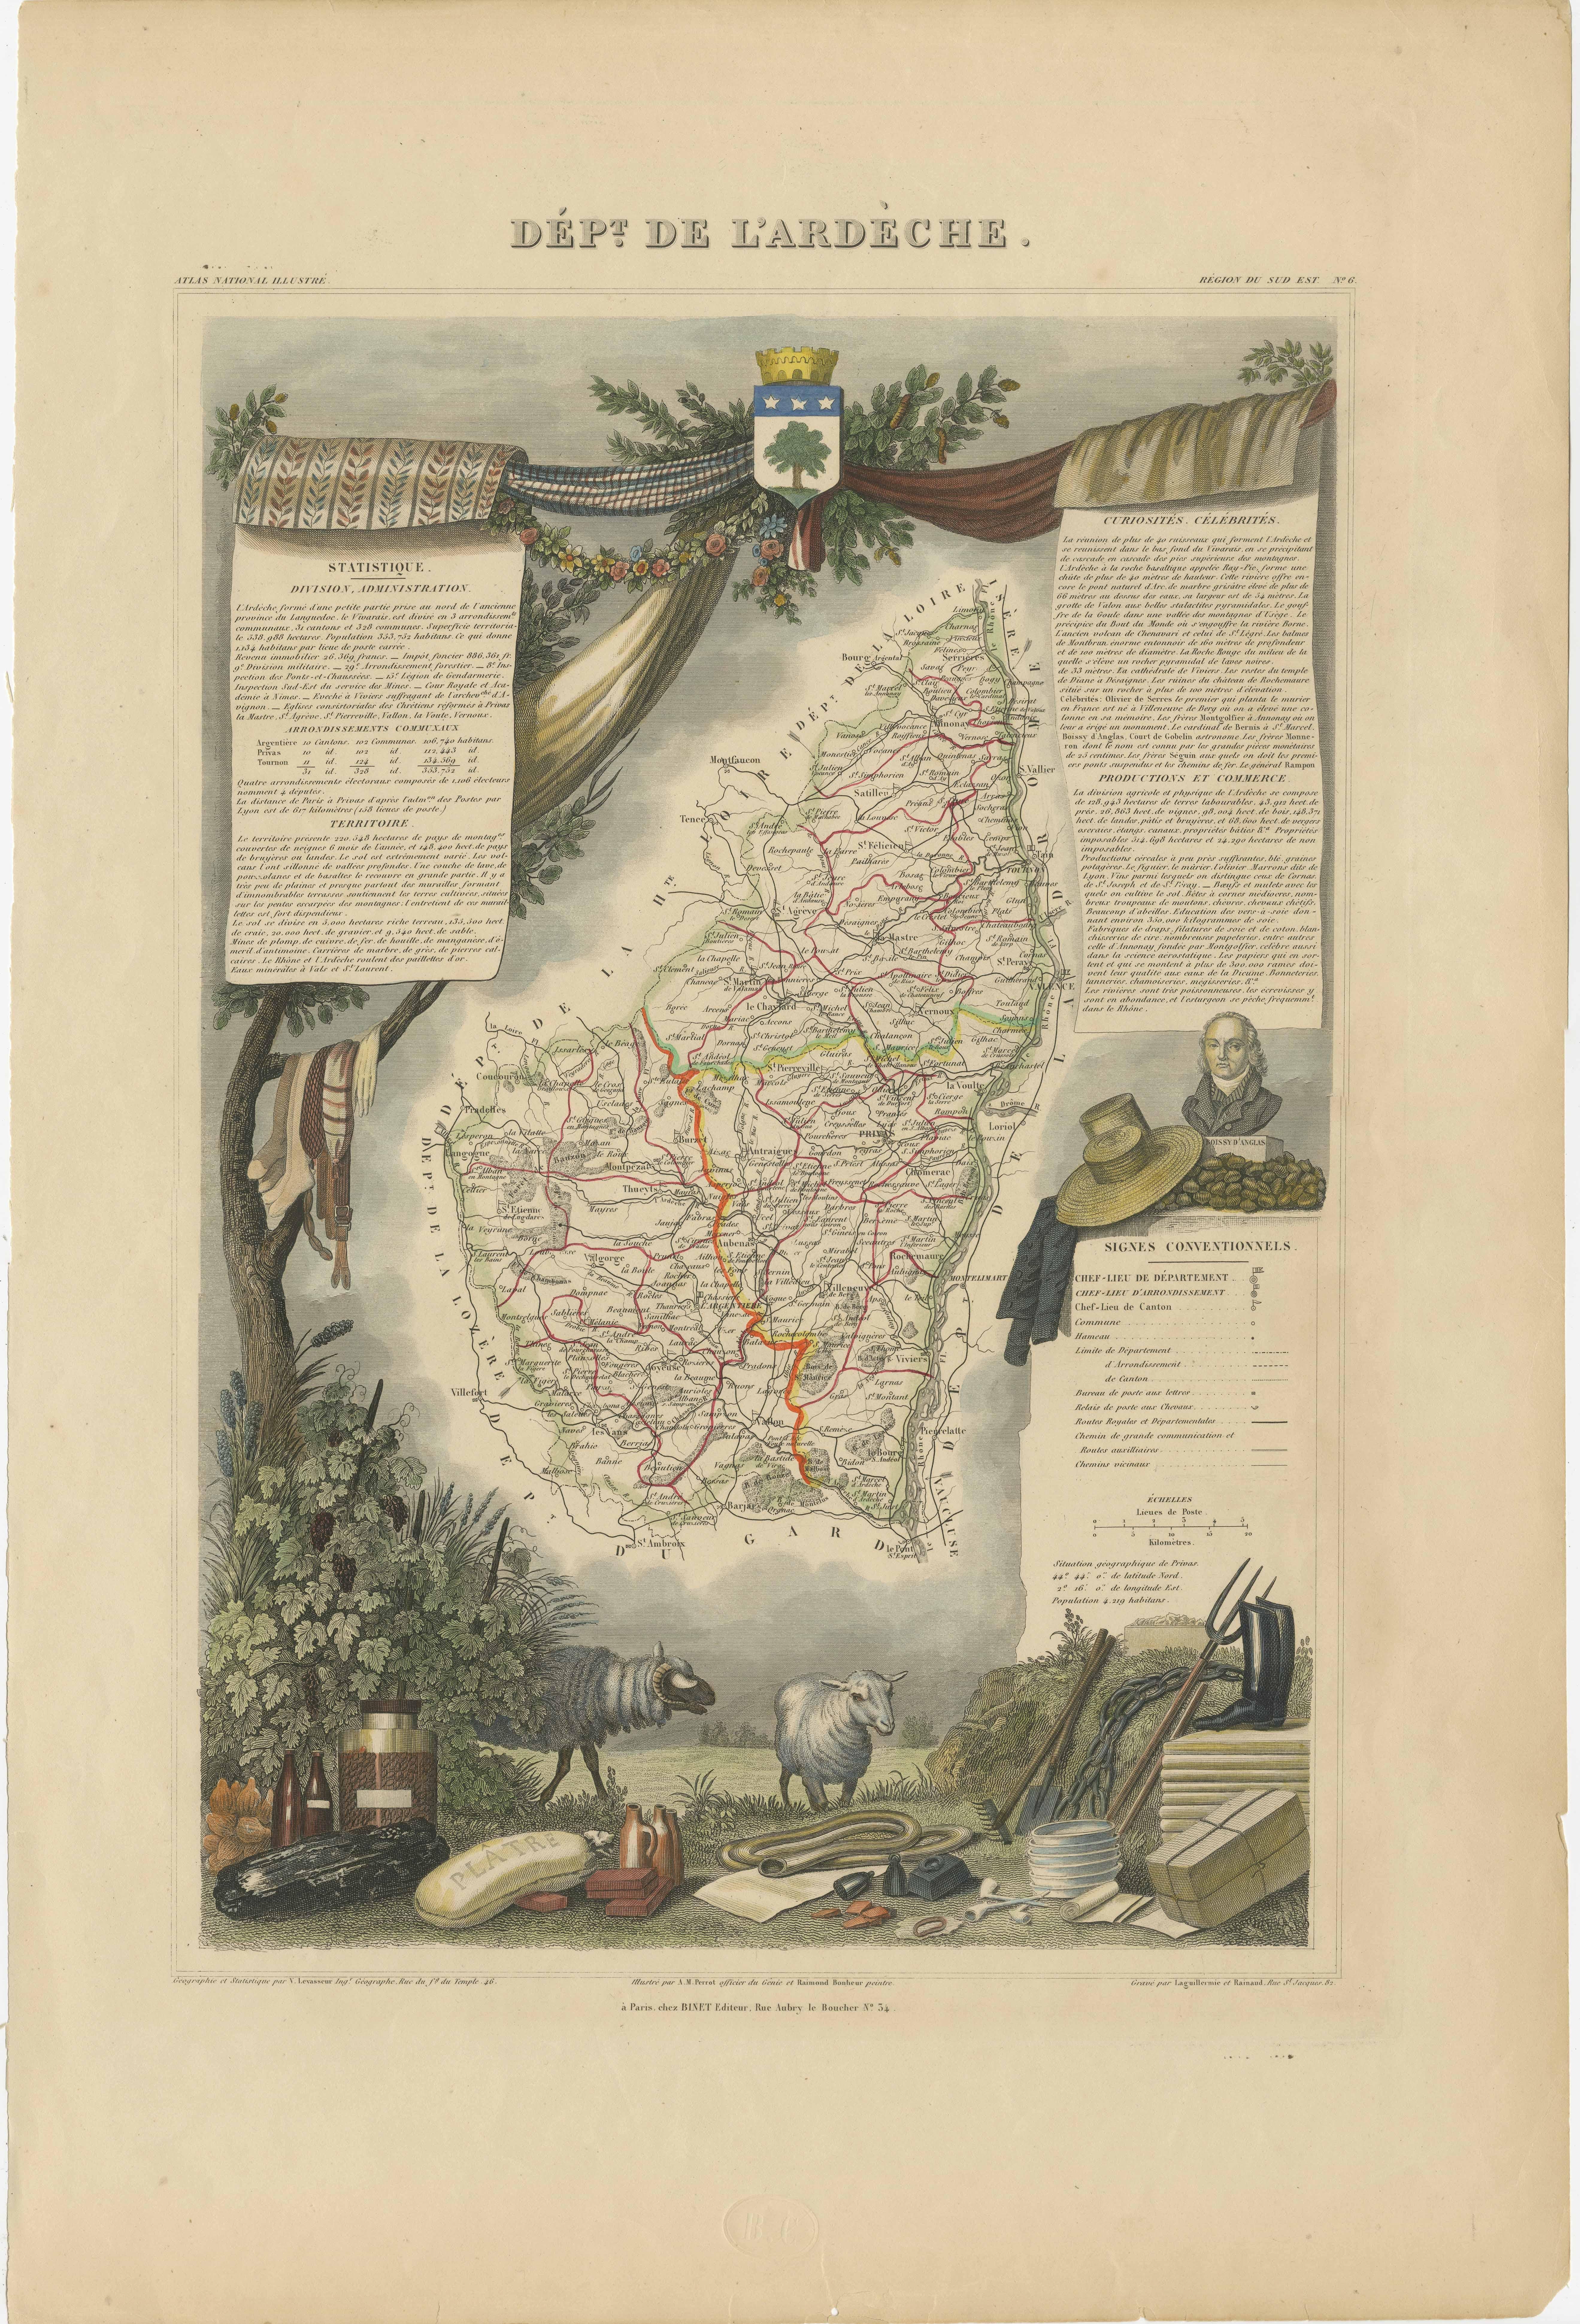 Antique map titled 'Dépt. de l'Ardèche'. Map of the Department of Ardèche, France. This region is known for its fine wines, agriculture, distilled spirits, and cheese. The capital city is Privas. The whole is surrounded by elaborate decorative